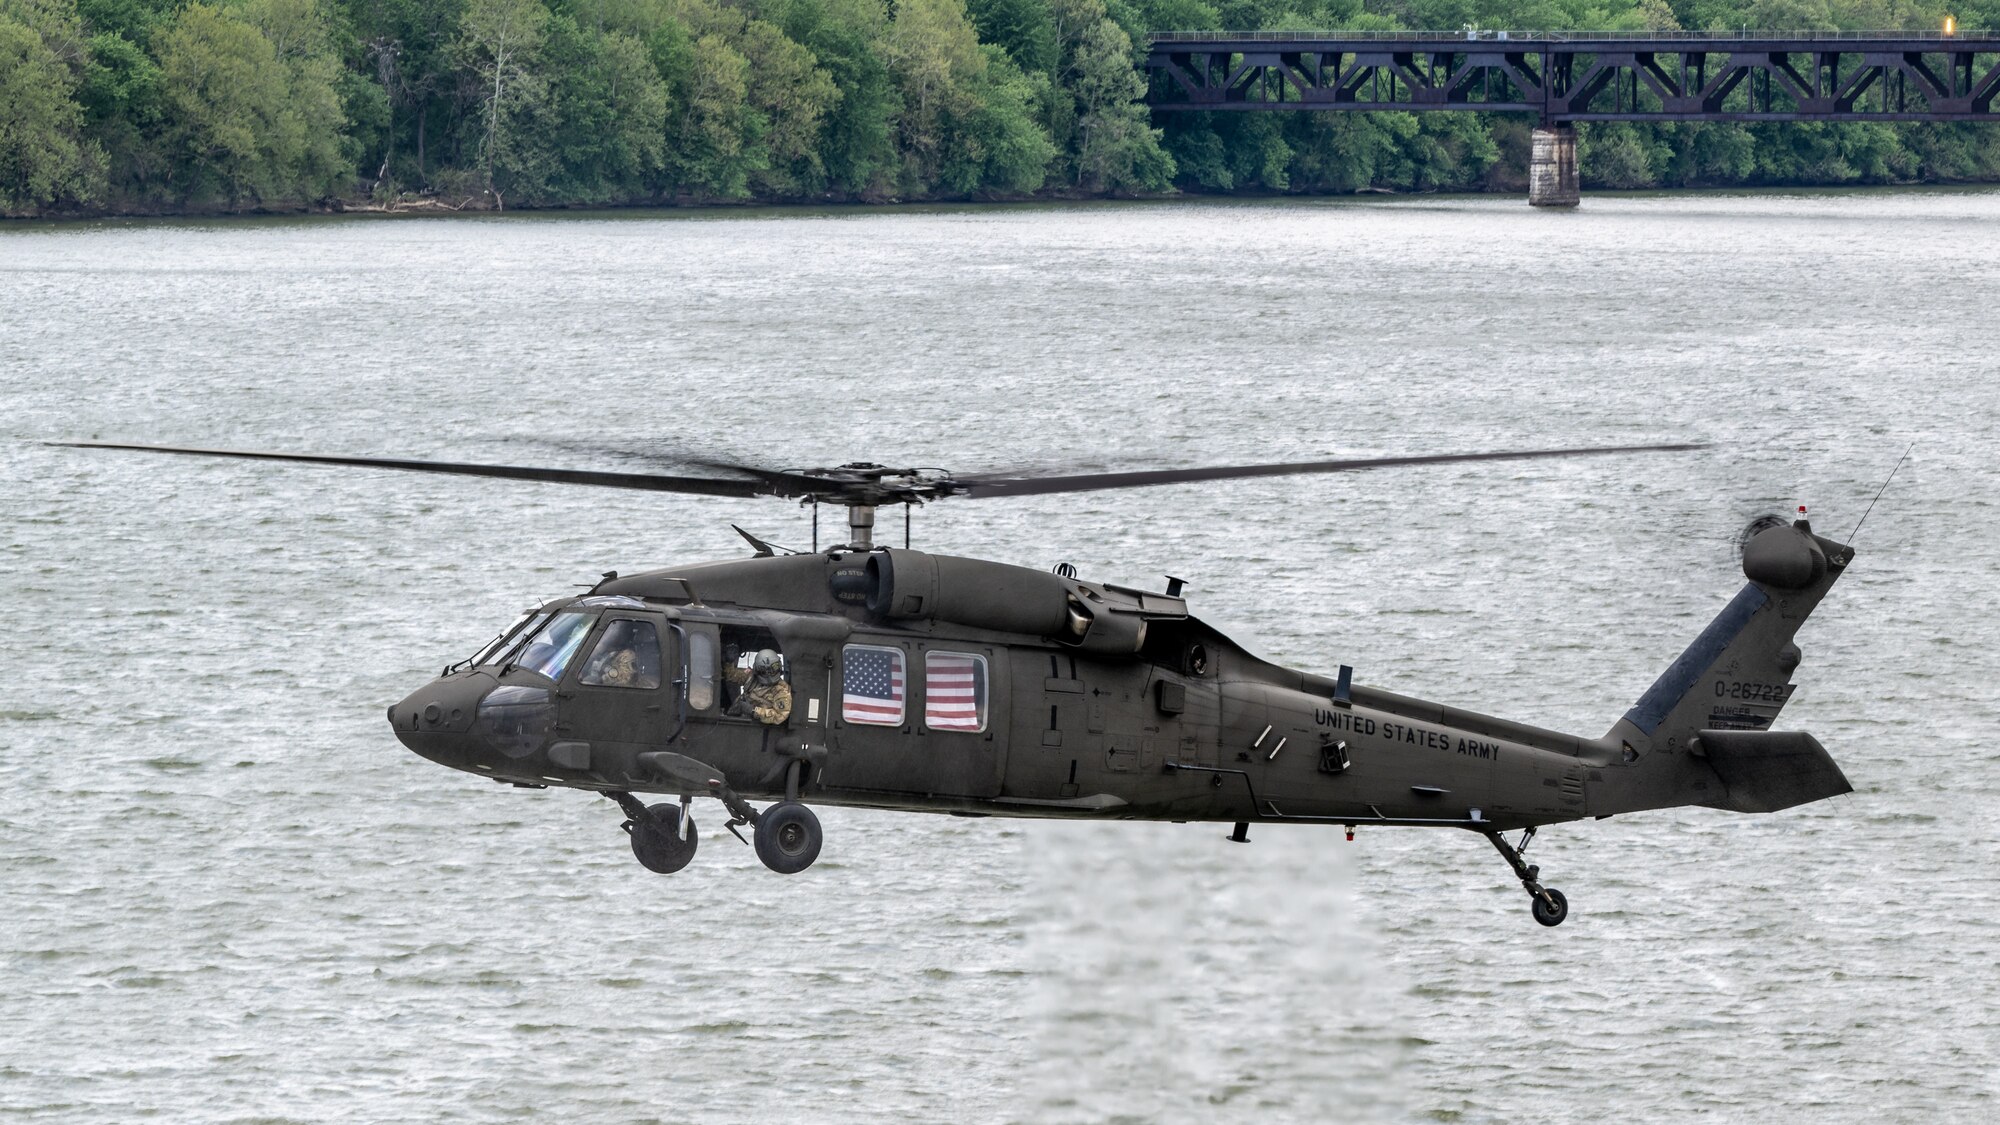 A U.S. Army UH-60 Black Hawk from the 229th Aviation Regiment at Fort Knox, Ky., performs an aerial demonstration along the banks of the Ohio River in downtown Louisville, Ky., April 22, 2023, as part of the annual Thunder Over Louisville air show. This year’s event featured more than 20 military and civilian planes, including a C-130J Super Hercules from the Kentucky Air National Guard, which served as the base of operations for military aircraft participating in the show. (U.S. Air National Guard photo by Dale Greer)